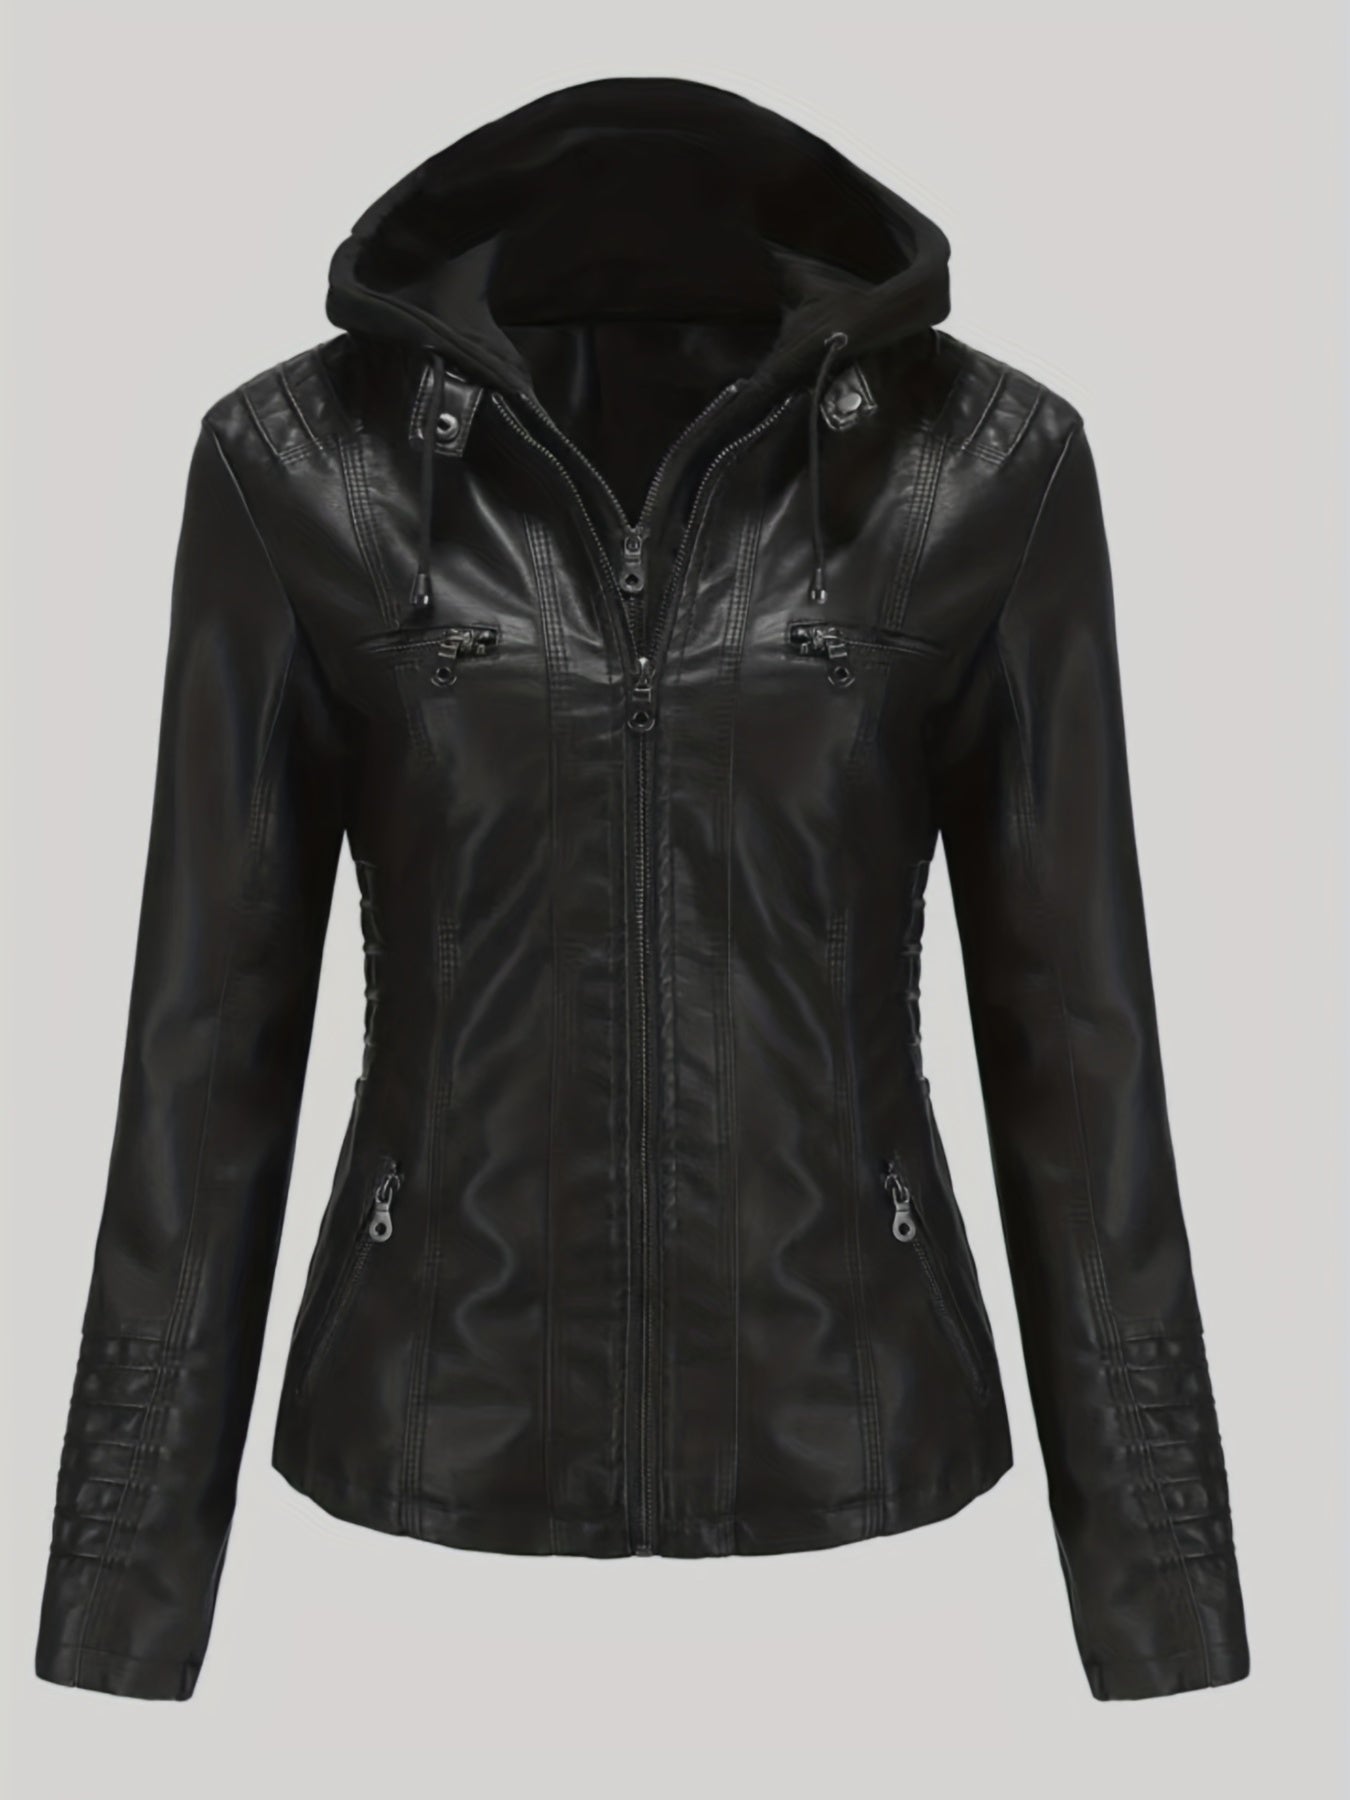 Antmvs Hooded Faux Leather Jacket, Casual Zipper Long Sleeve Outerwear, Women's Clothing